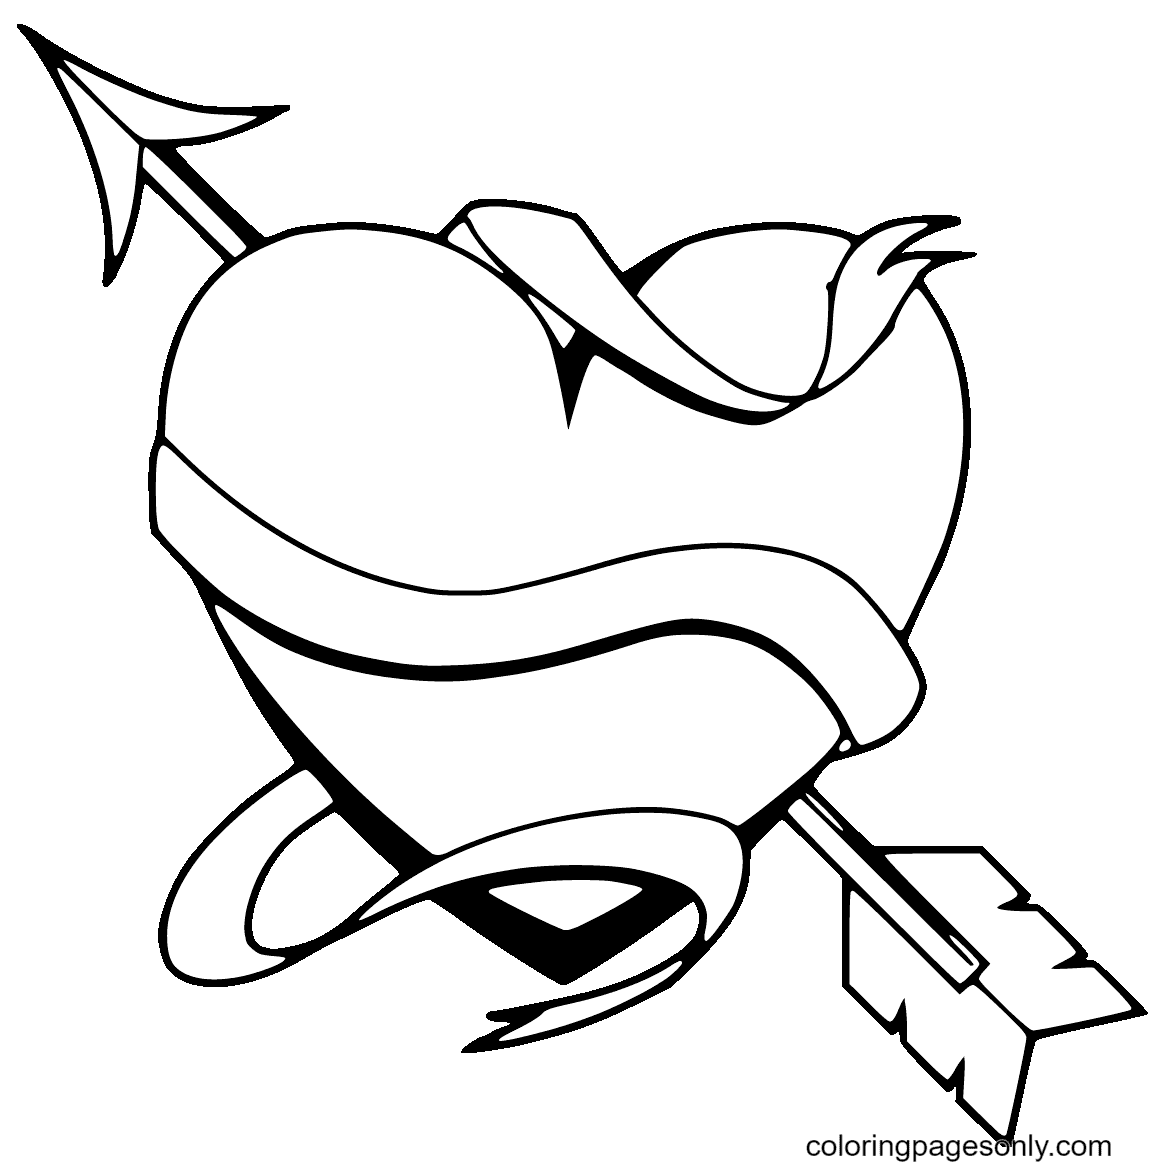 Heart and Arrow Coloring Page